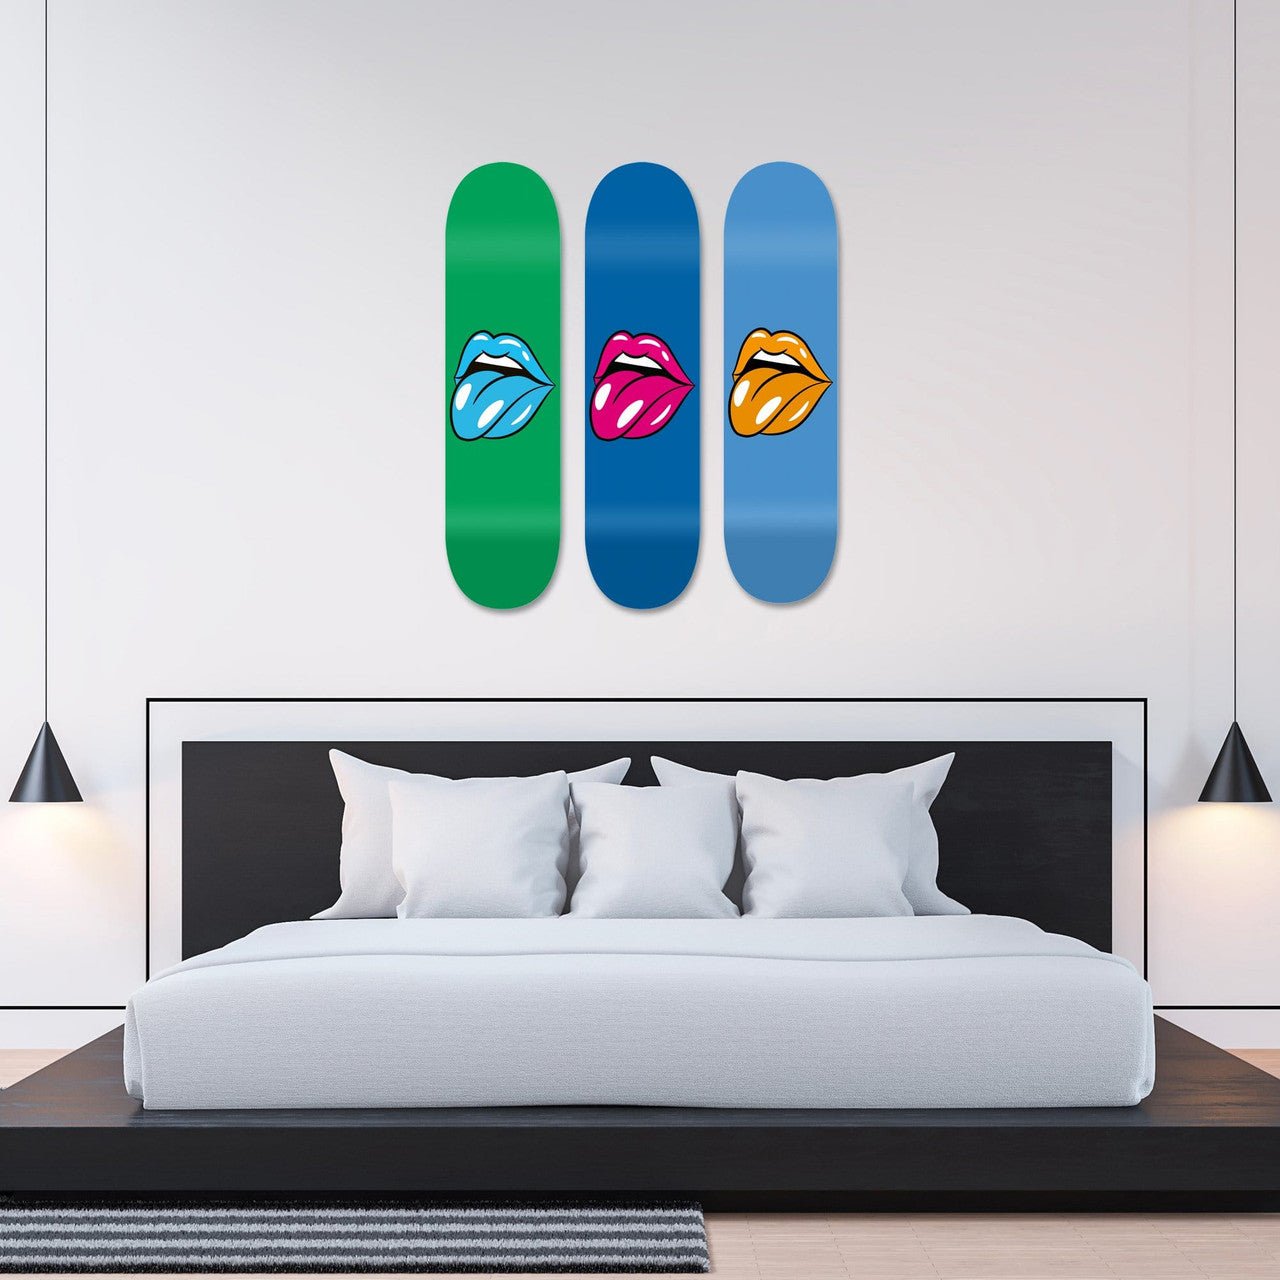 Bundle: "Lips King" - Skateboard - The Art Lab Acrylic Glass Art - Skateboards, Surfboards & Glass Prints Wall Decor for your Home.